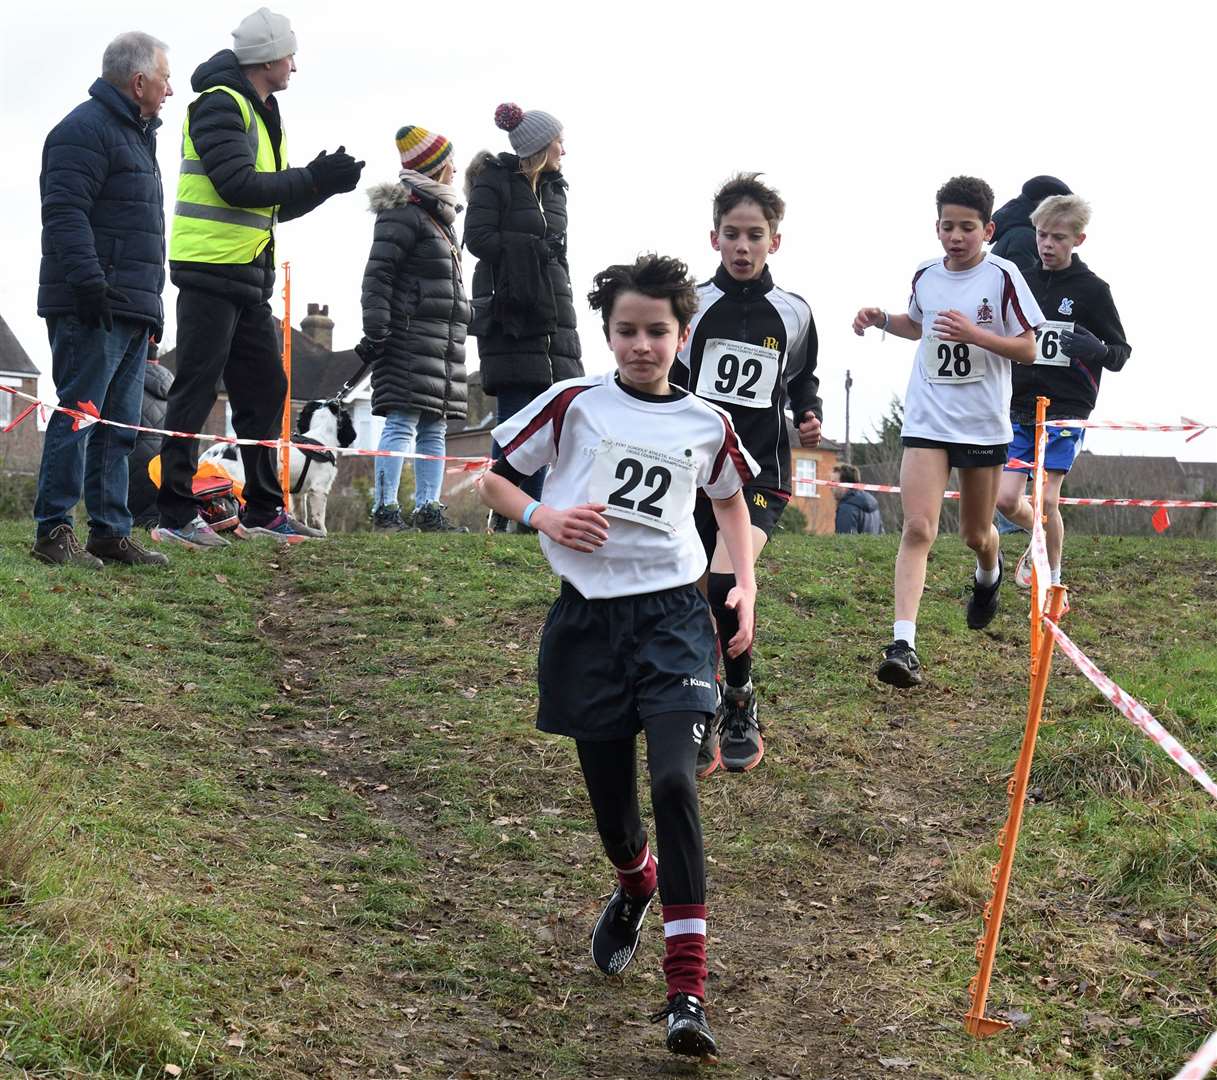 Tate Campion picks up the pace for Bromley in the boys’ Year 7 competition. Picture: Simon Hildrew